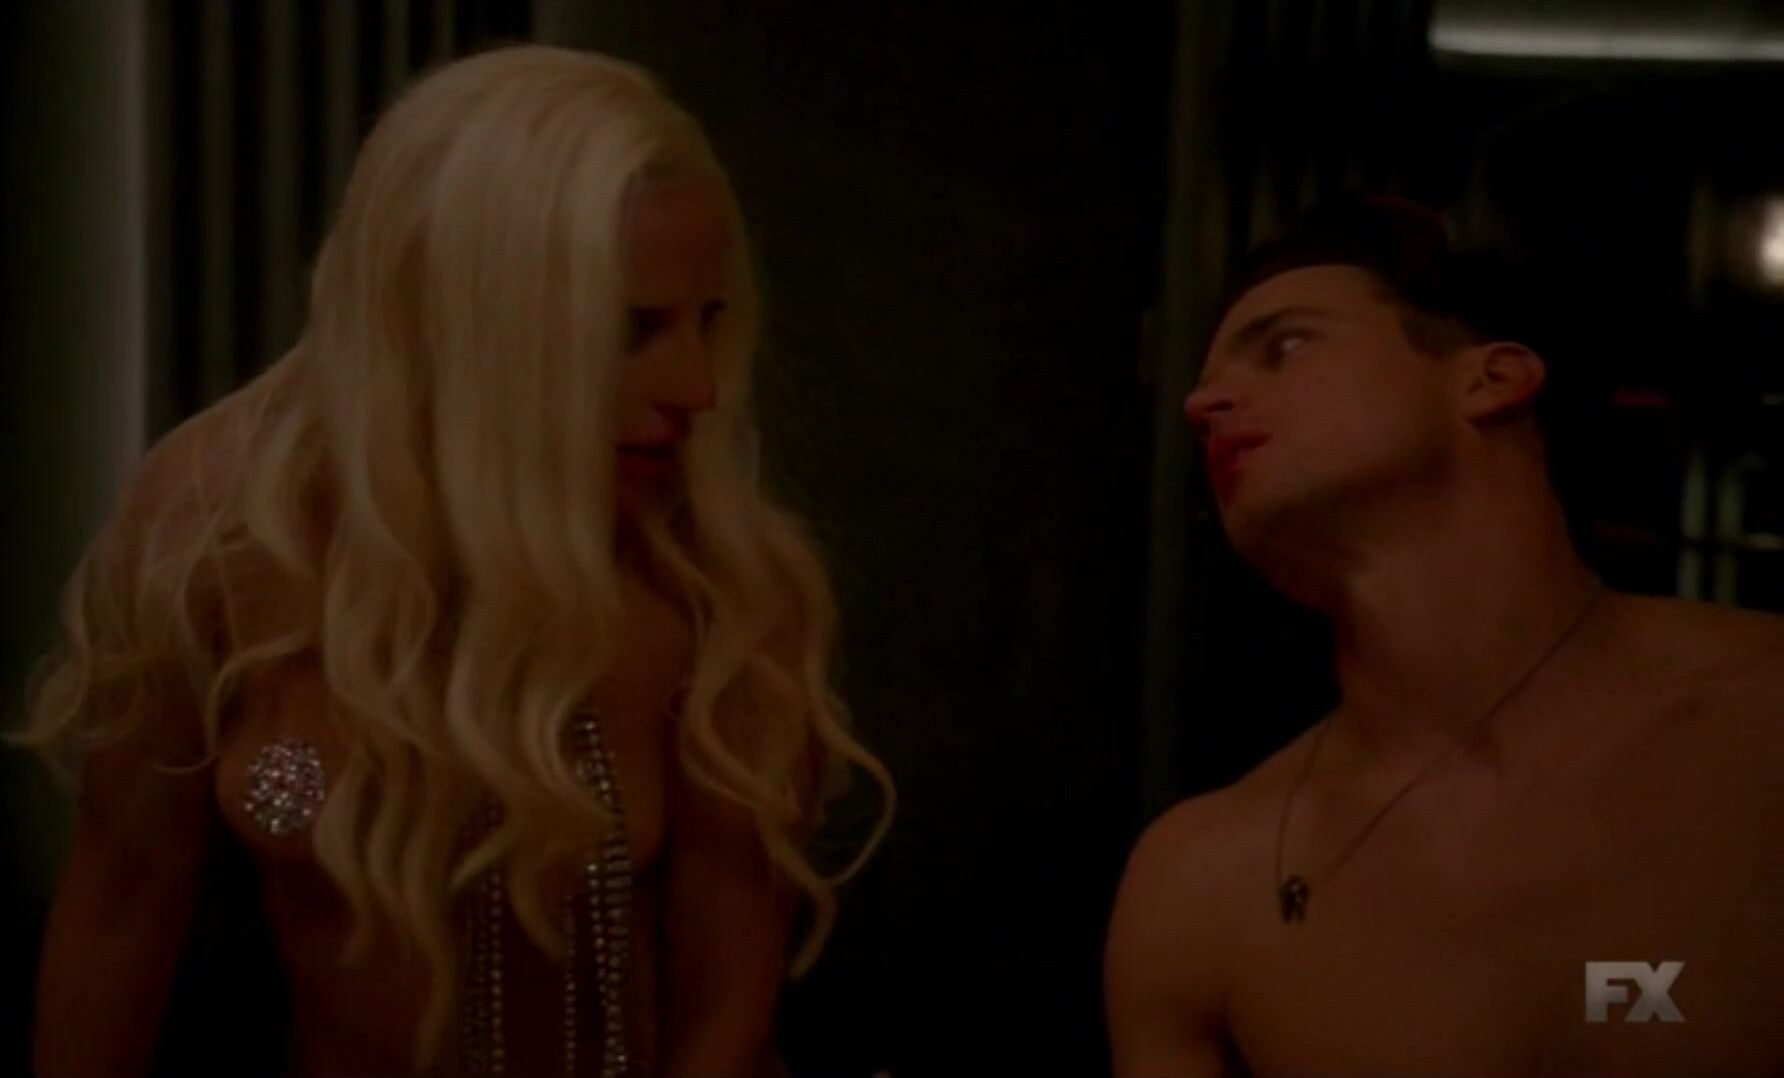 Cheat Lady Gaga and the second beautiful actress do it in TV series American Horror Story Pervs